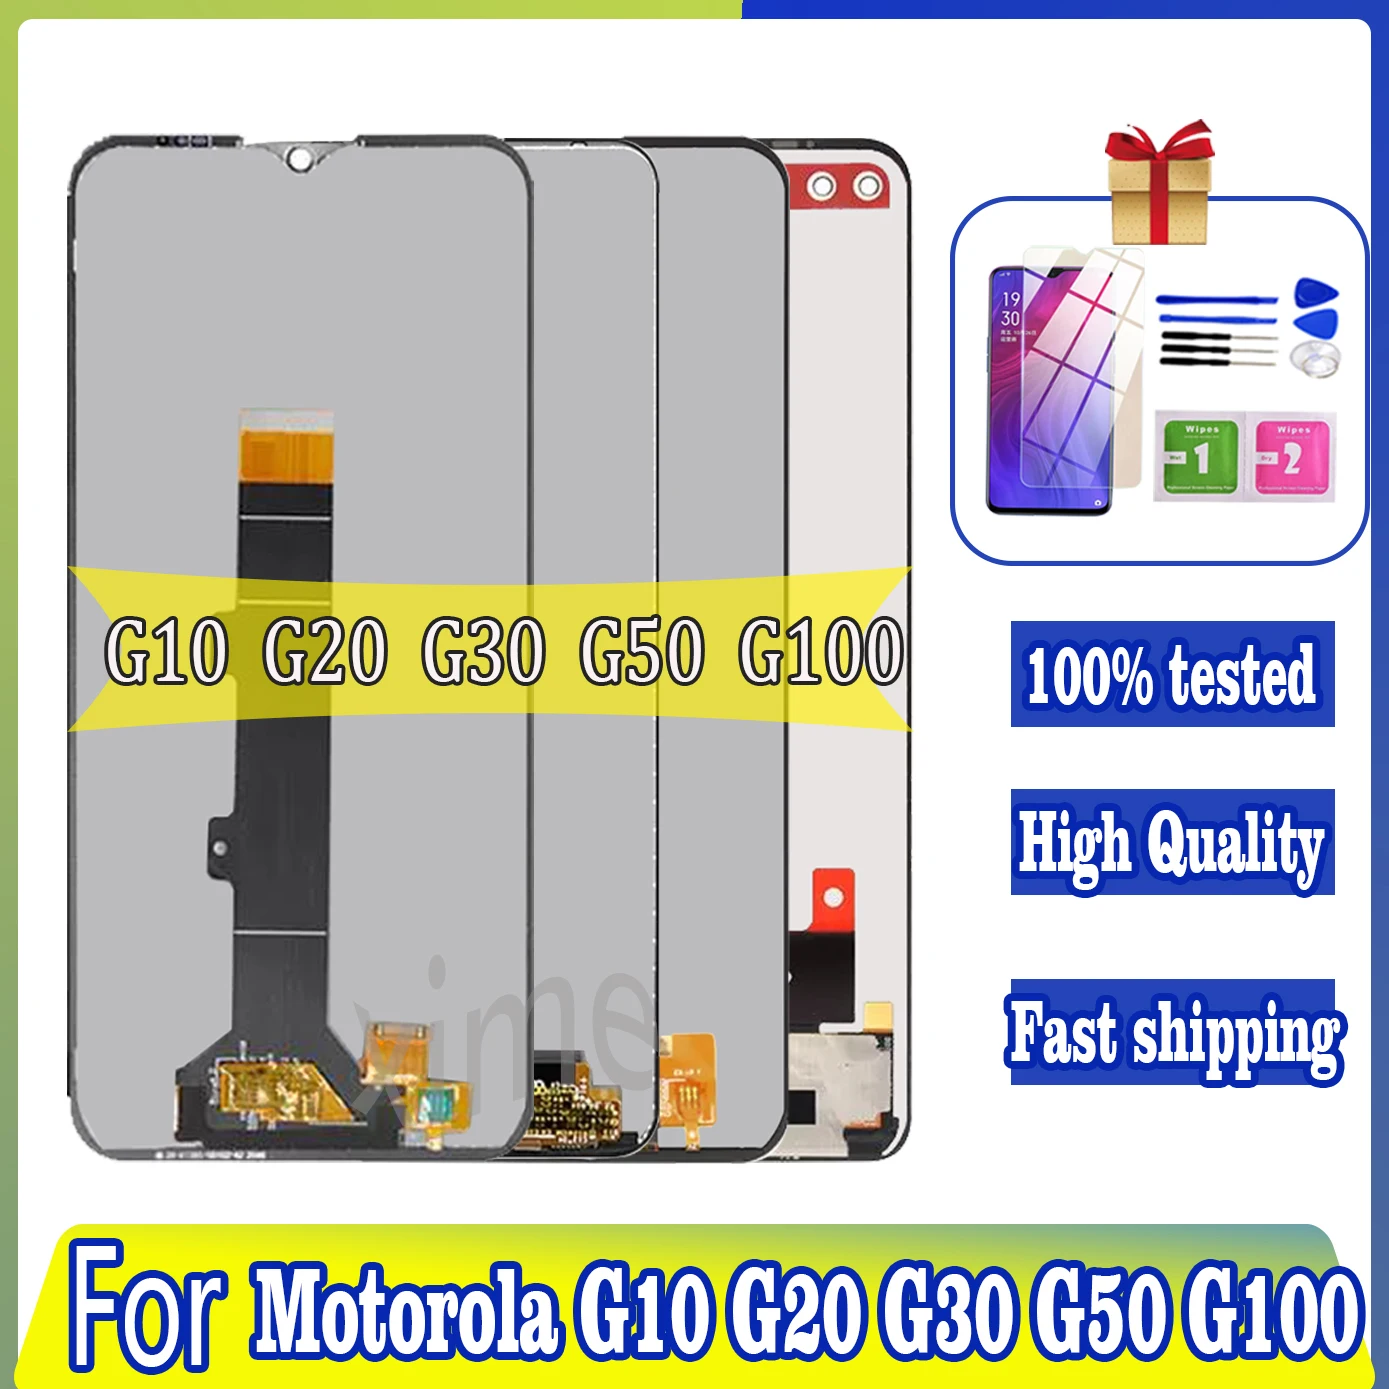 LCD For Motorola Moto G10 G20 G30 G50 G60 G100 LCD Display Touch Screen Digitizer Display Replacement Repair Parts 100% Tes